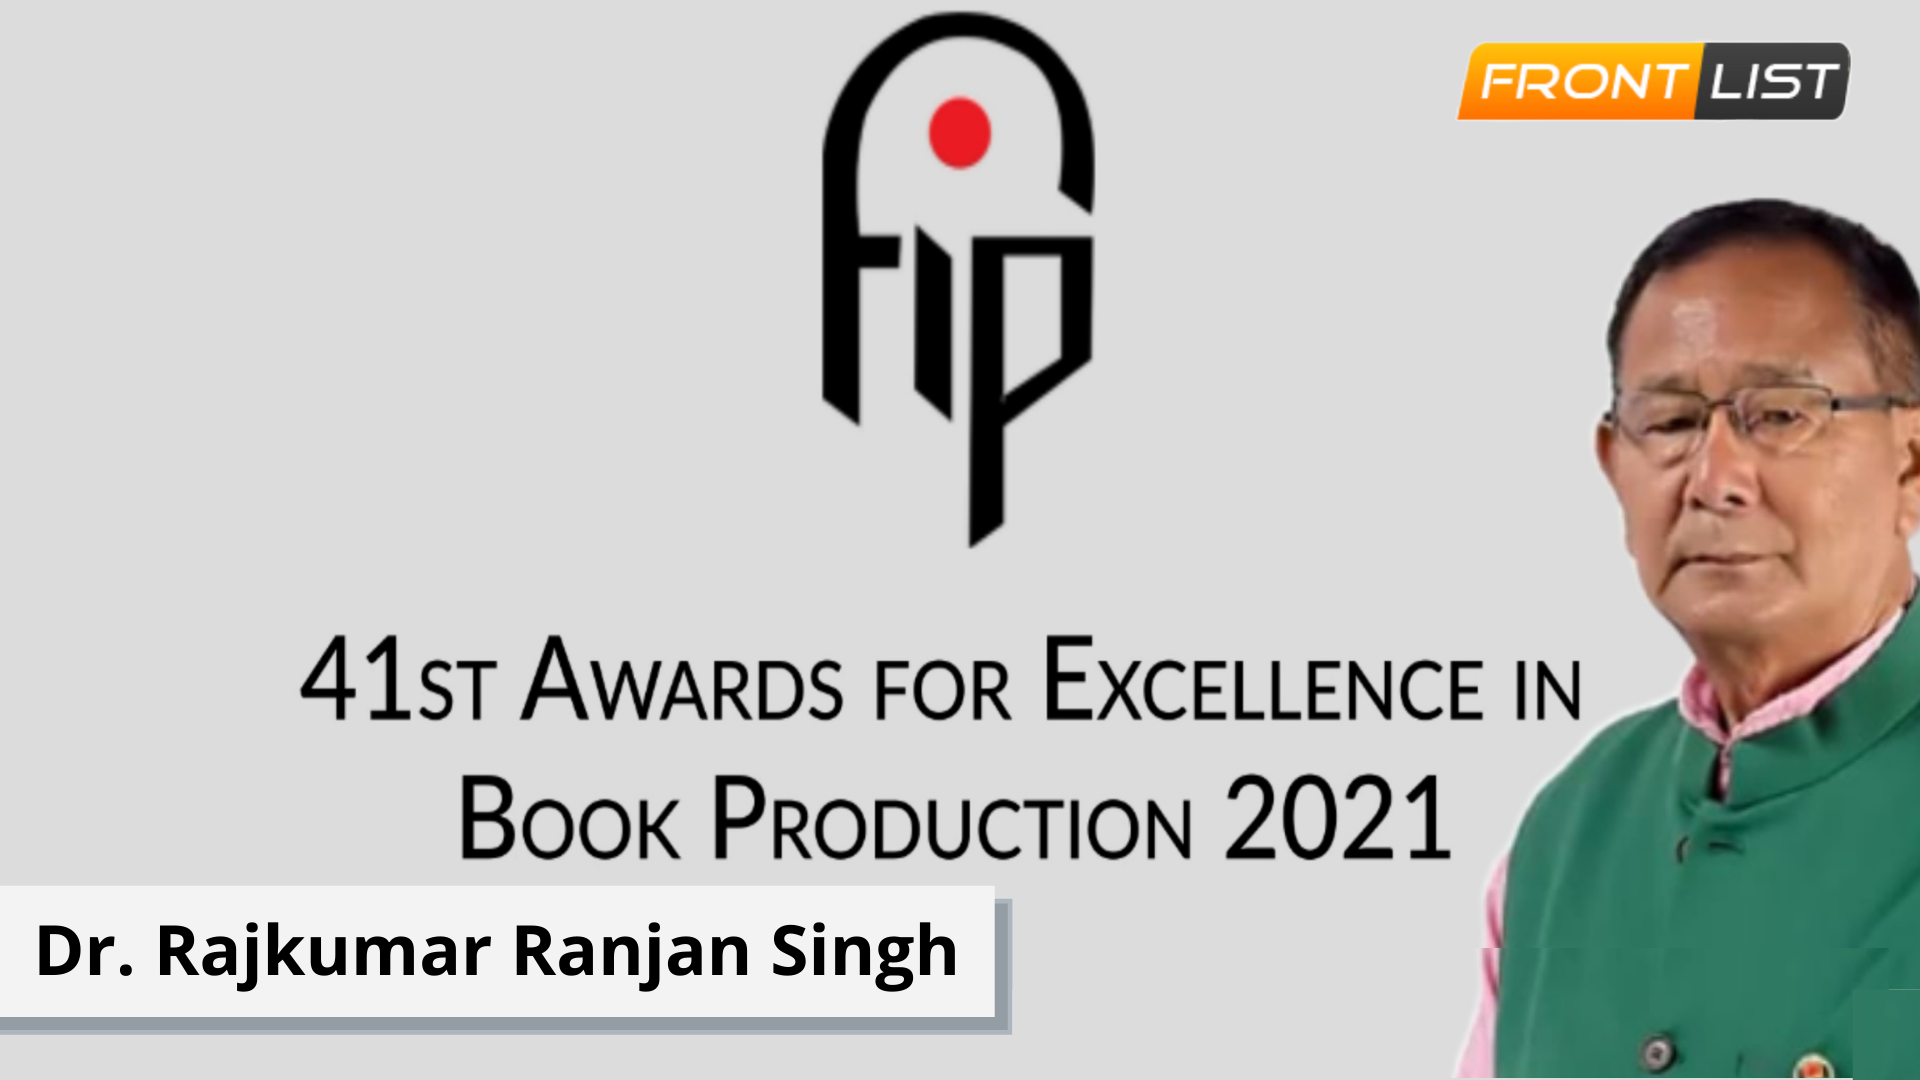 Chf. Guest Dr. Rajkumar Ranjan Singh @ 41st FIP Annual Awards For Excellence in Book Production 2021